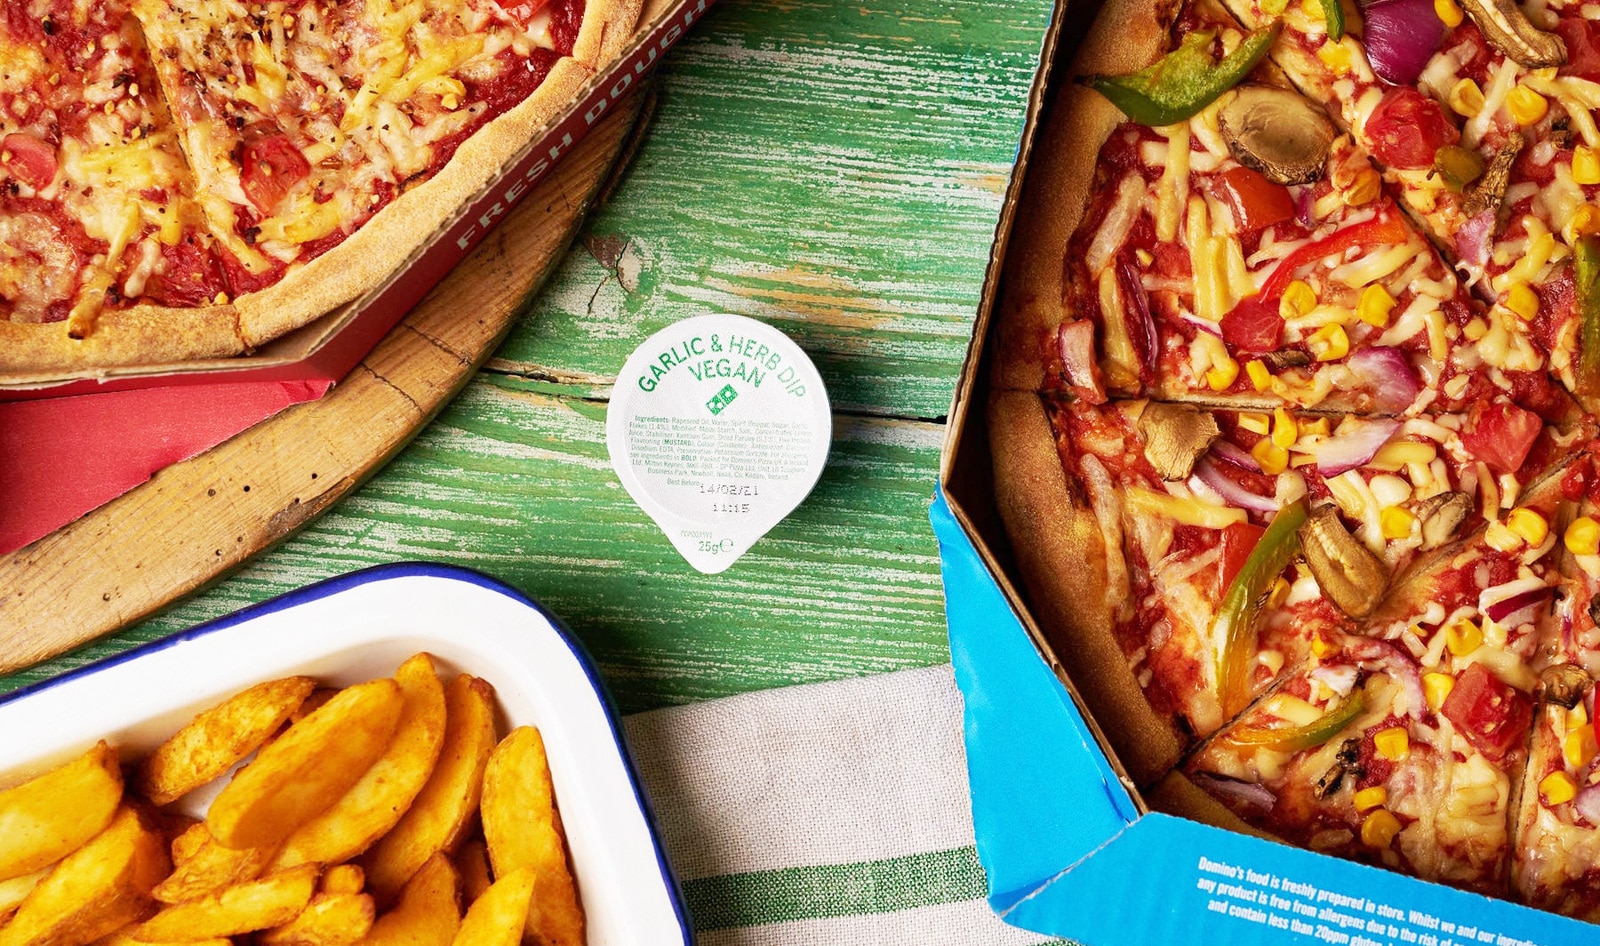 Domino’s Launches Cheesy Vegan Pizzas, With Creamy Vegan Dipping Sauce, at 1,200 UK and Ireland Locations&nbsp;